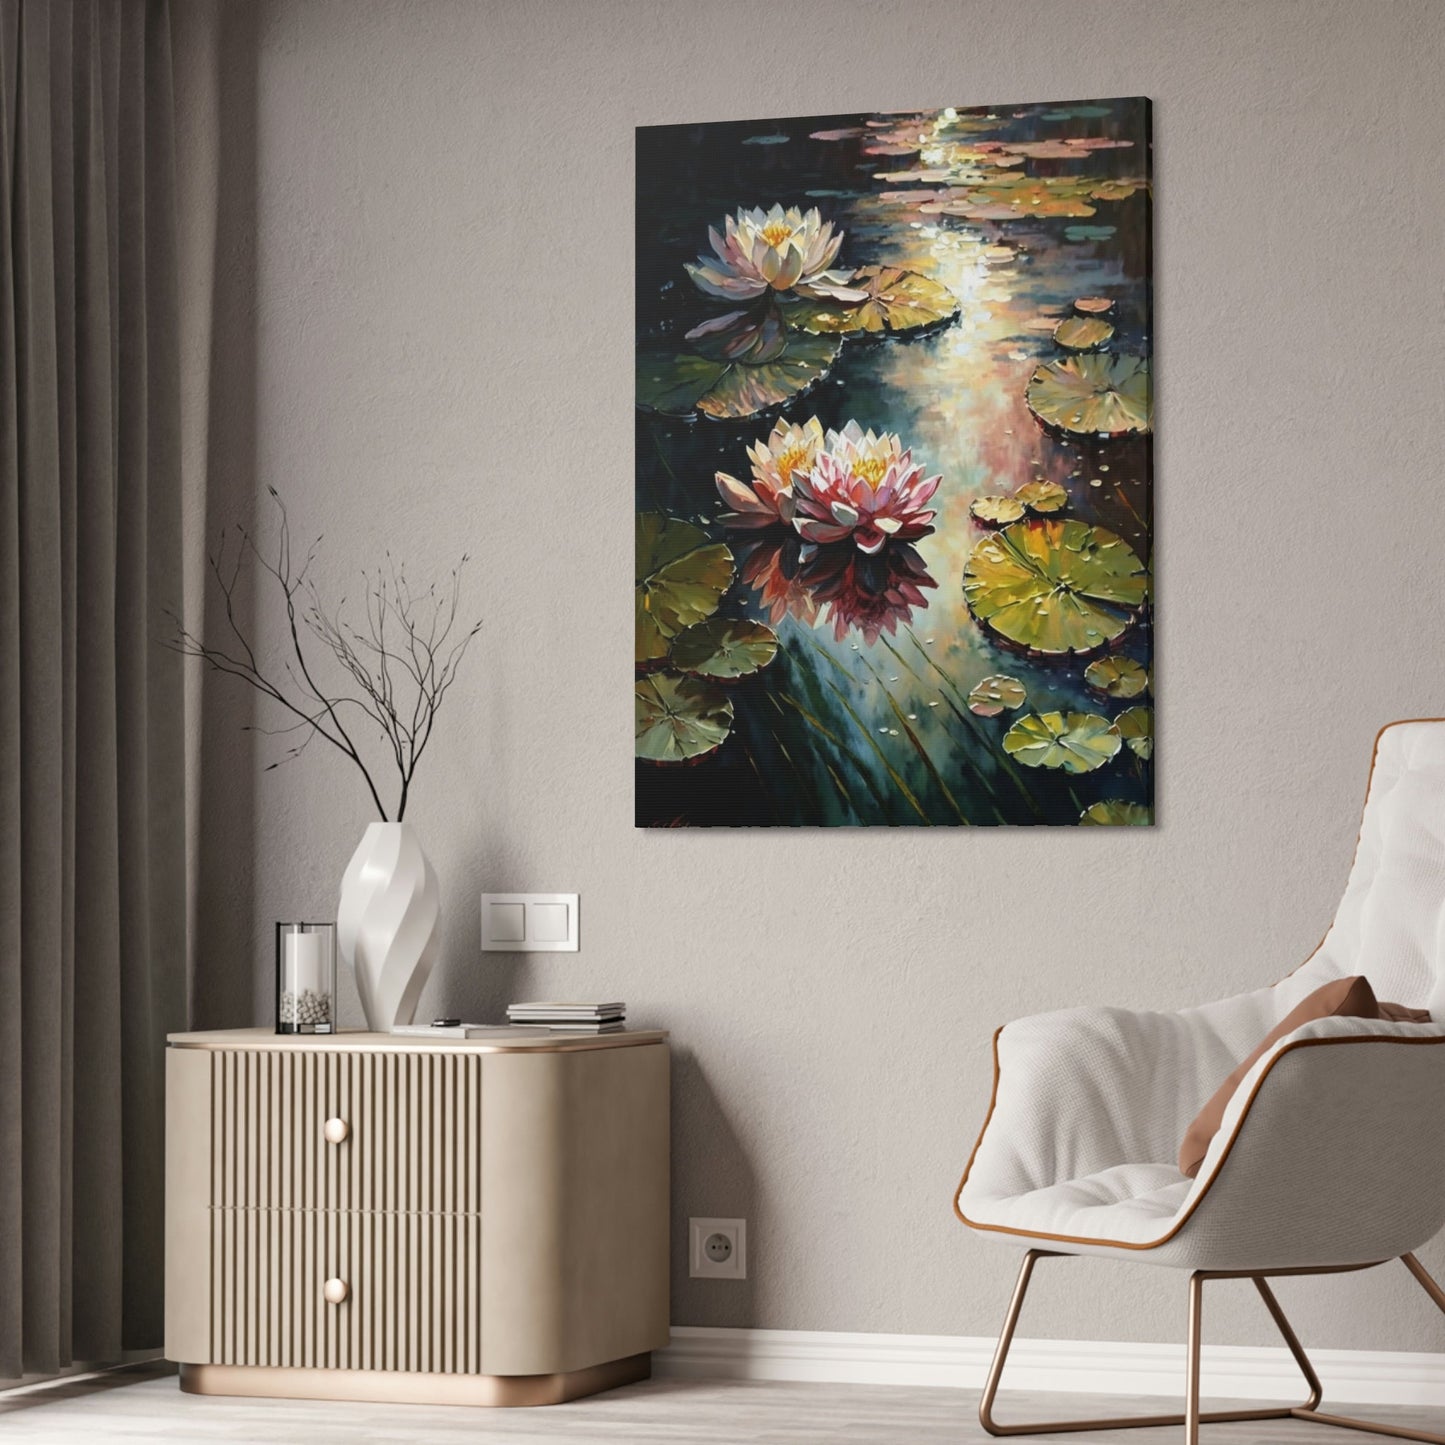 A Symphony of Colors: A Painting of Vibrant Waterlilies